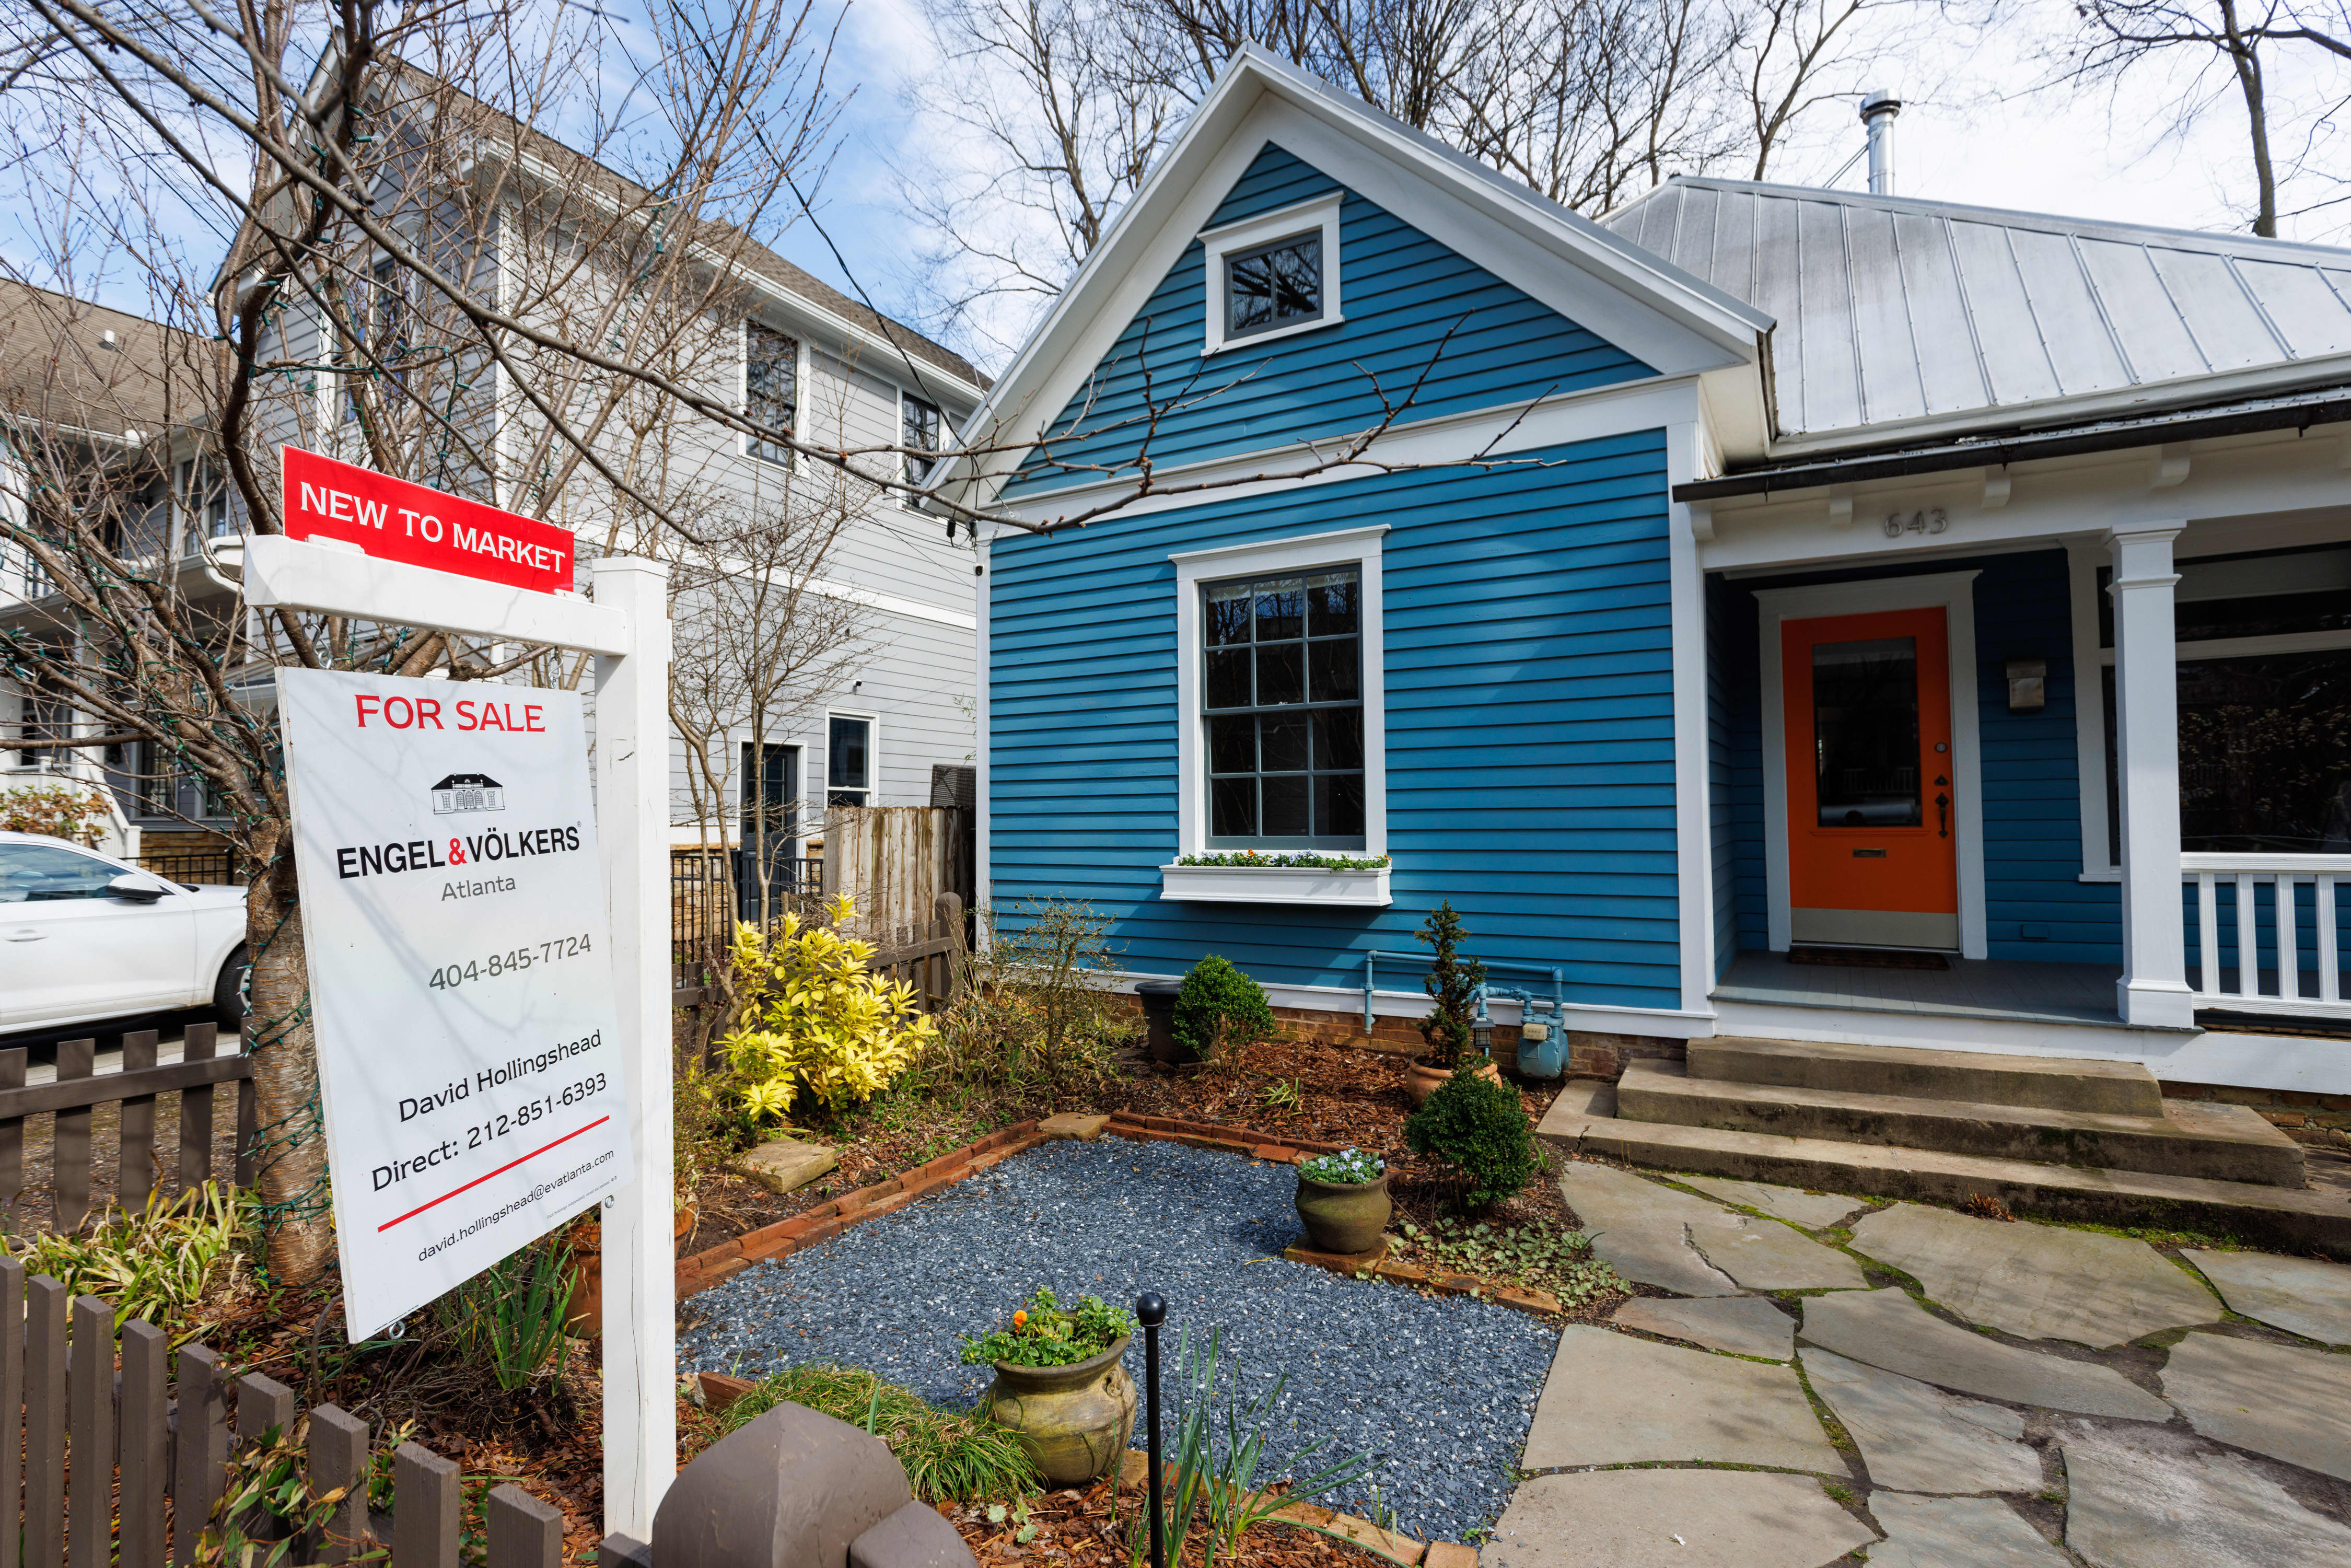 Home prices are rising after several months of decline